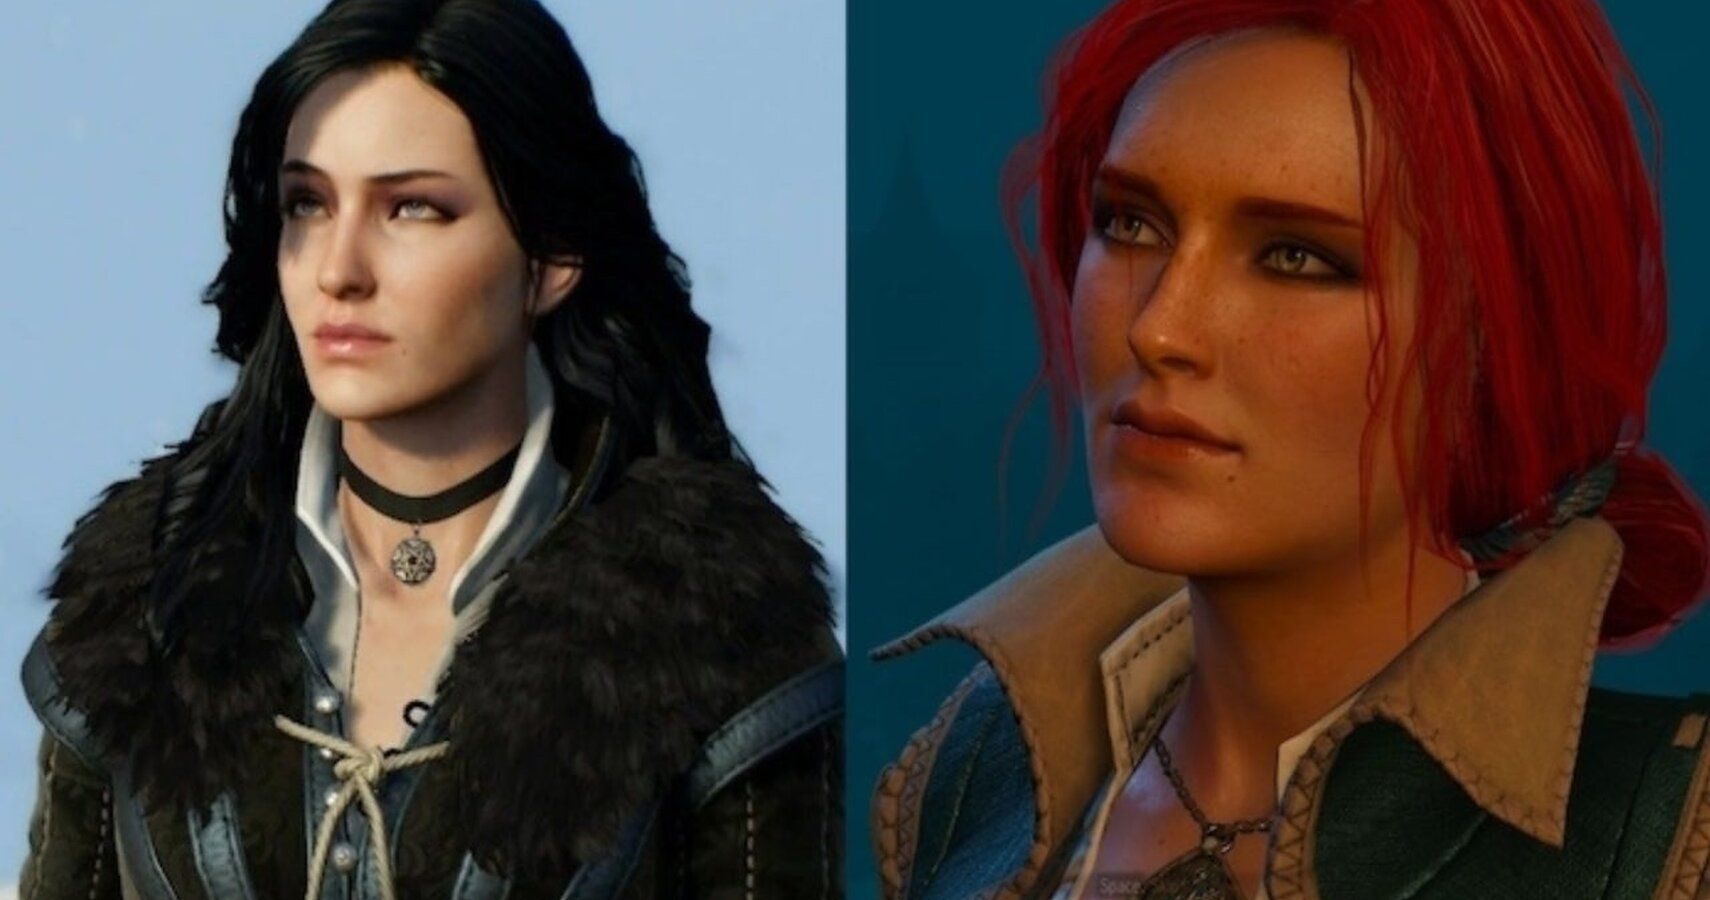 rsz-le-witcher-3-triss-yenneferv1-tipu-4939171